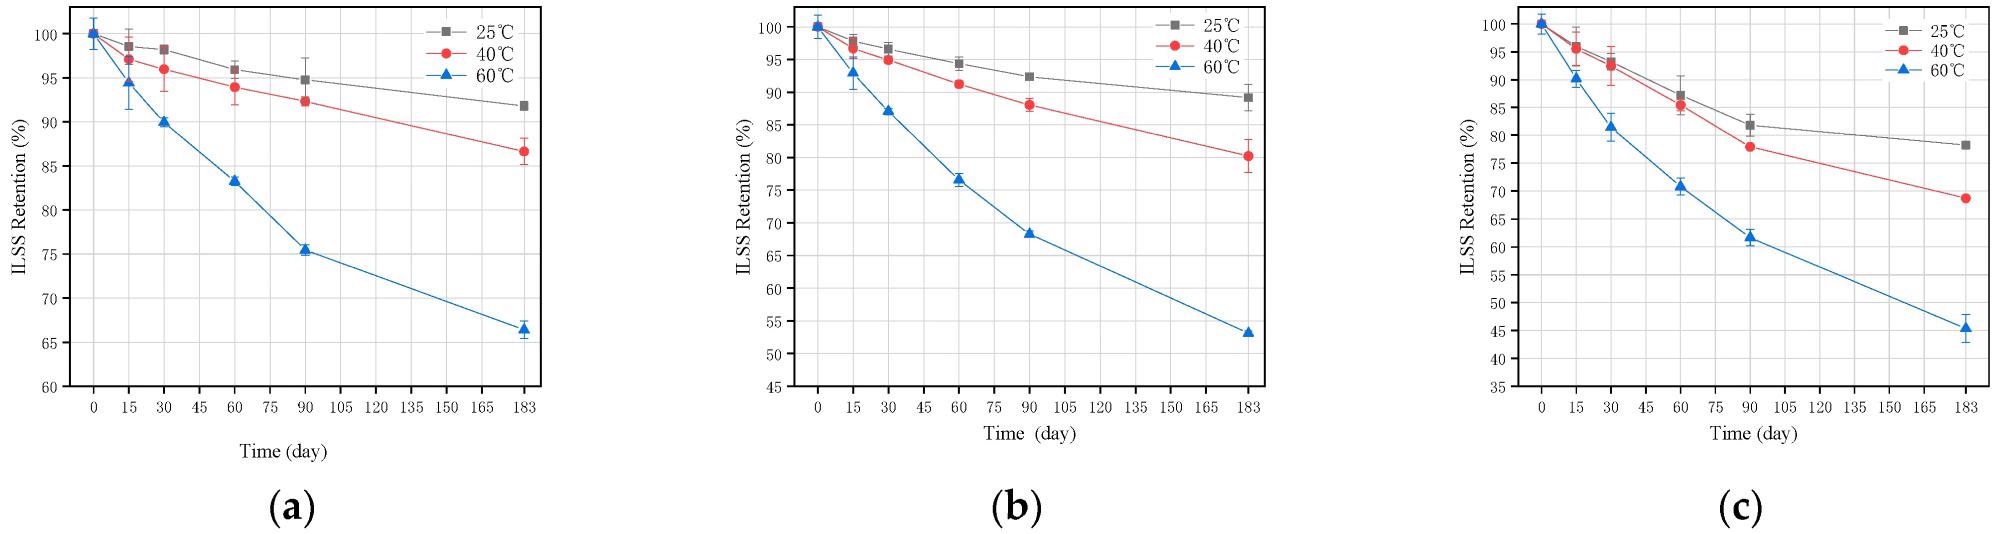 Comparison of ILSS retention of GFRP bars in three temperatures: (a) SW; (b) SWC; and (c) SA.